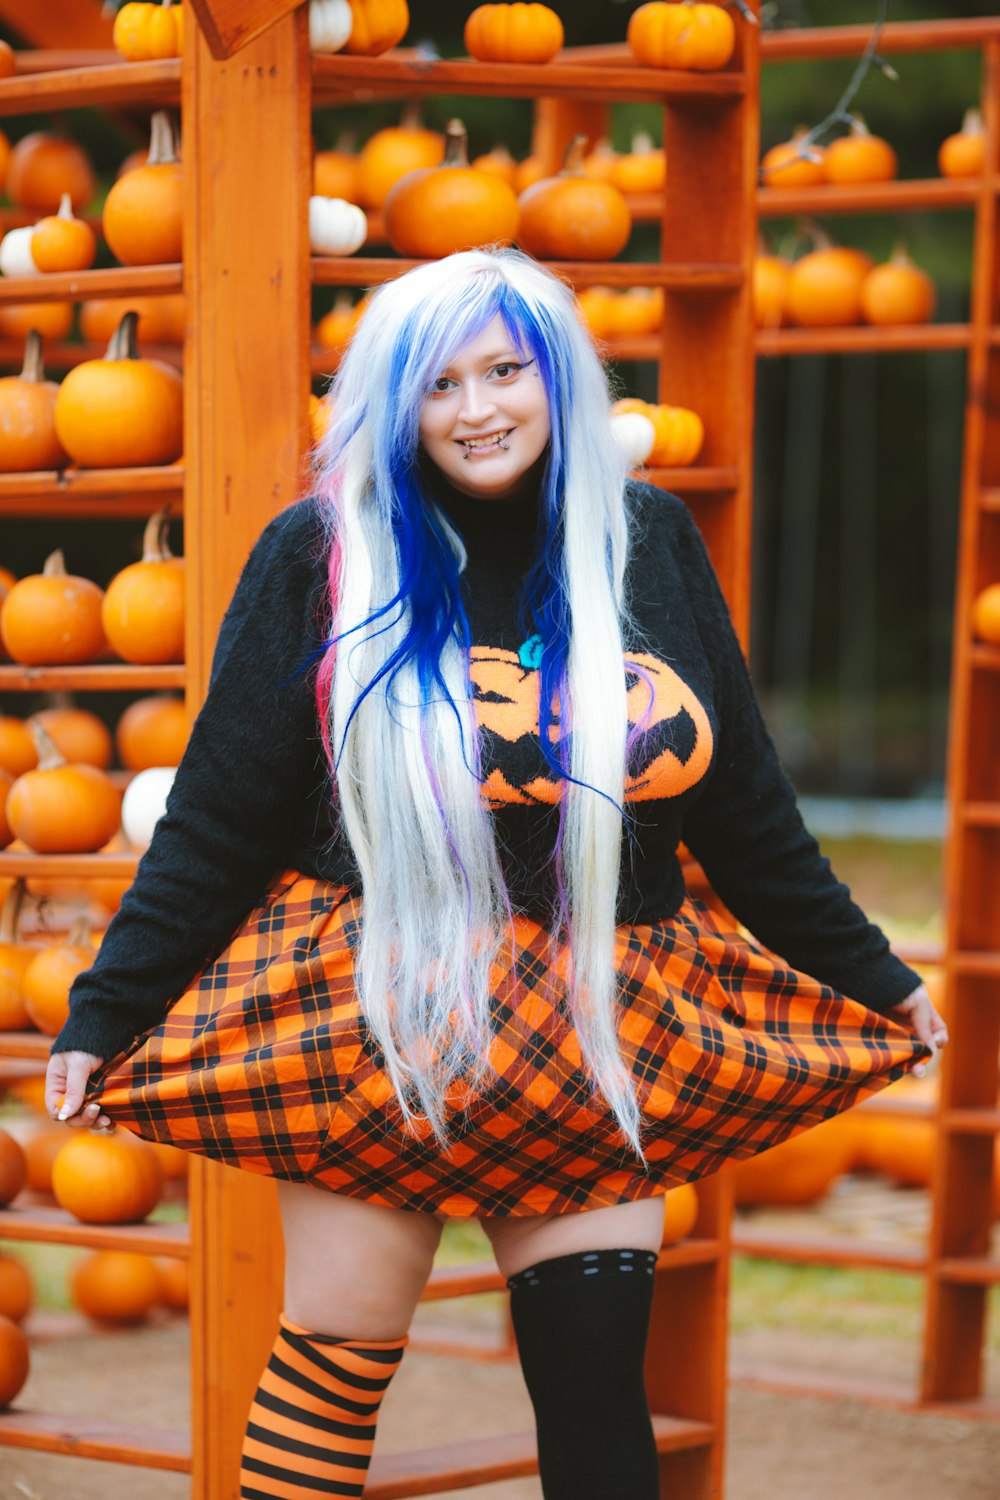 a woman with long white hair and blue hair posing in front of pumpkins